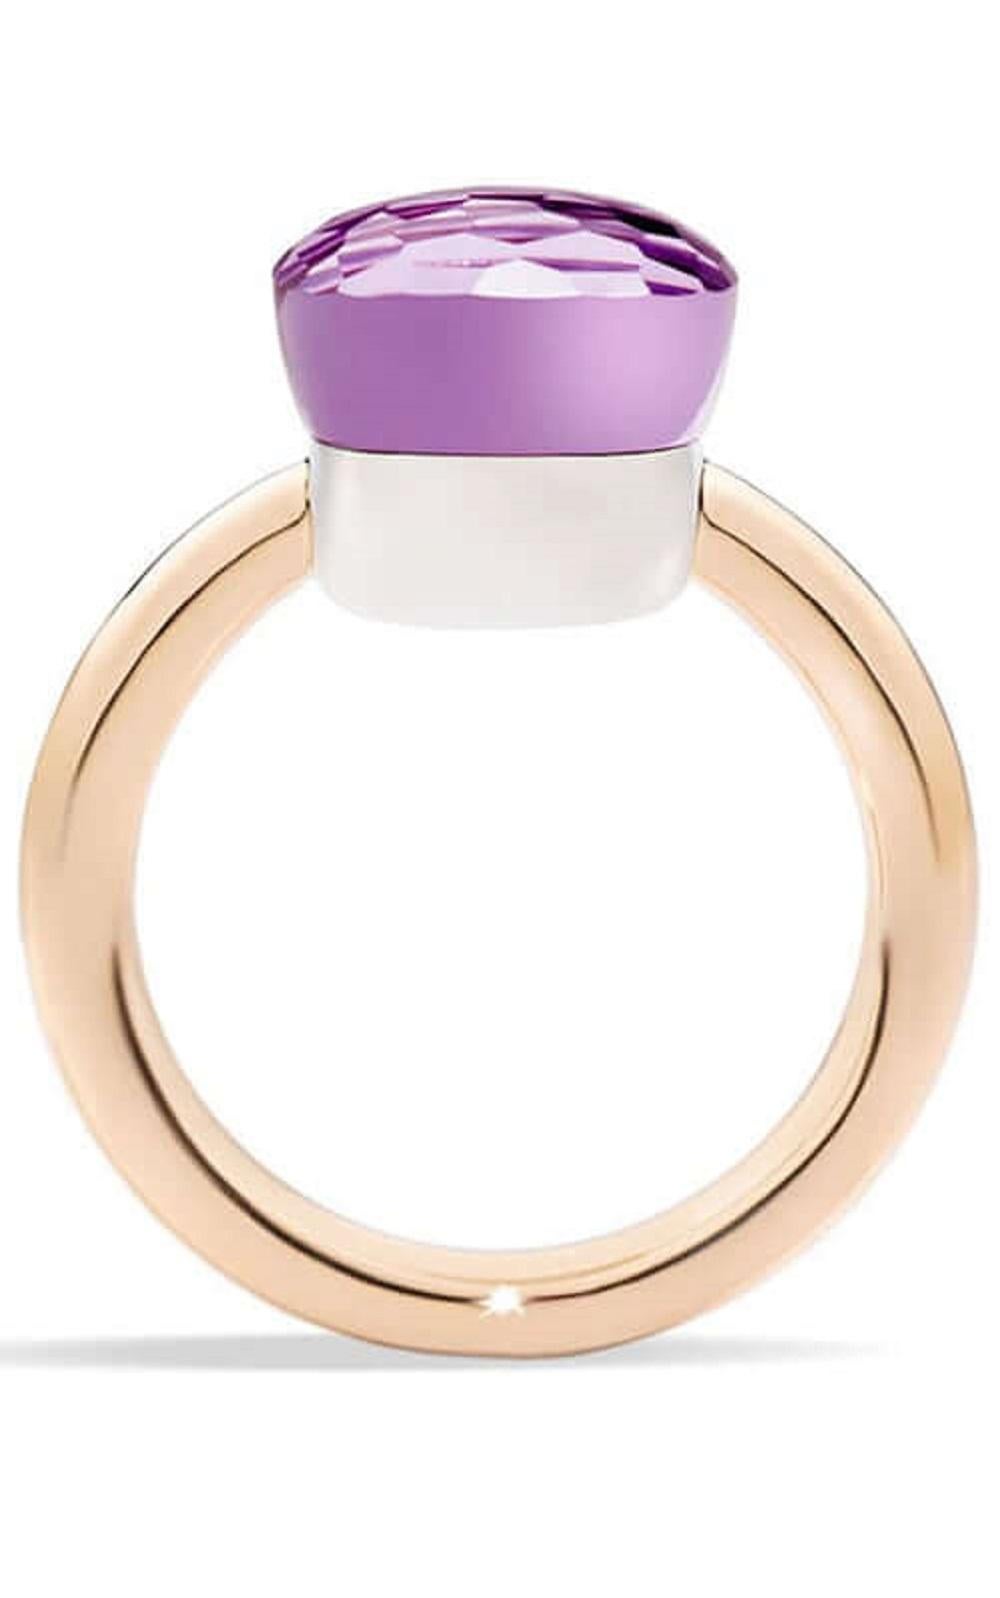 Pomellato Ring Nudo Classic PAA1100O6000000OI.  Nudo classic ring in rose gold and white gold with amethyst.
Size 53